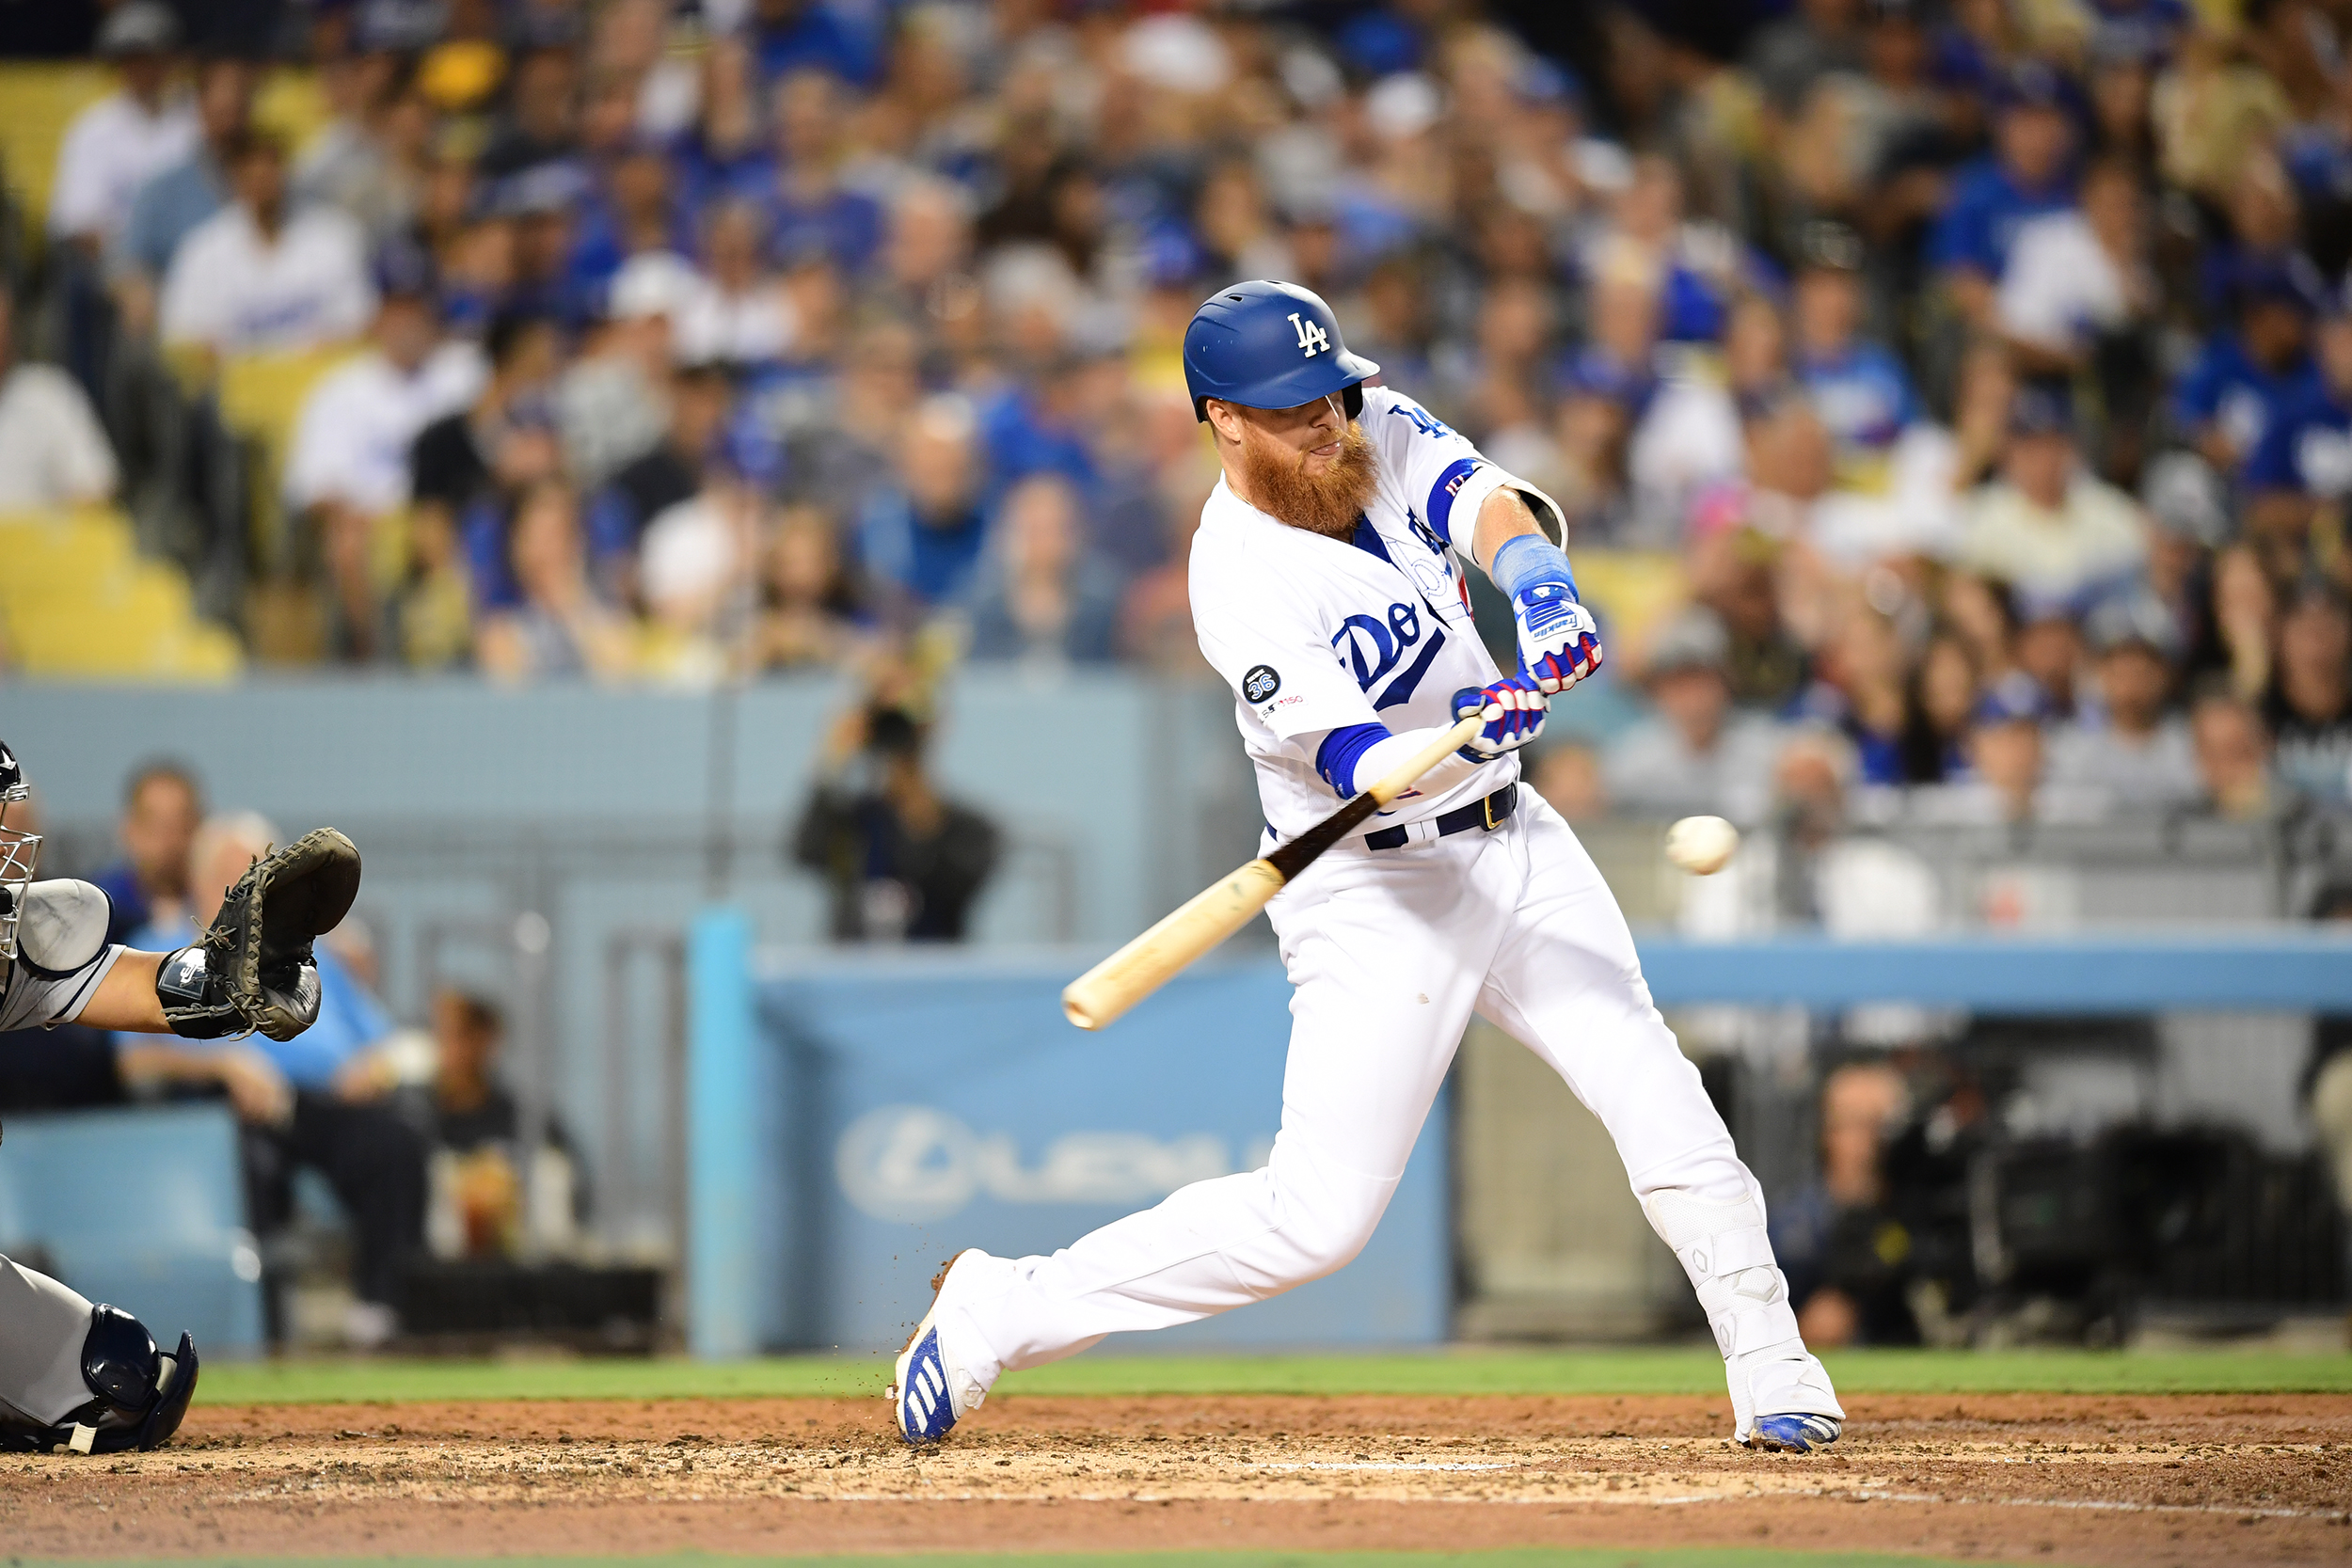 Charter Licenses Dodgers RSN SportsNet LA to ATandT, Ends 6-Year Carriage Stalemate Next TV